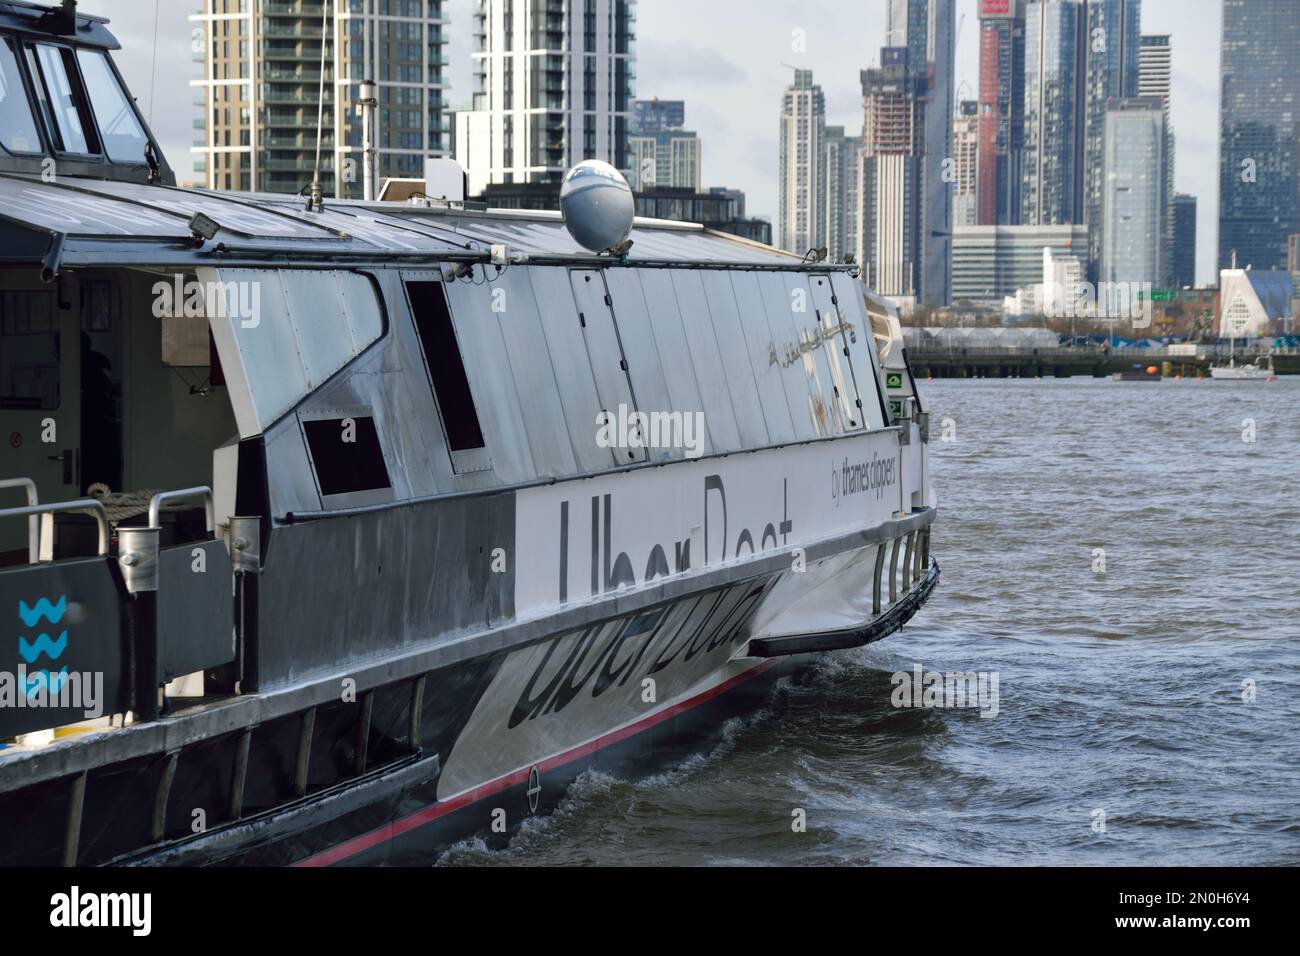 Uber Boat by Thames Clipper River Bus Service Schiff Cyclone Clipper betreibt den RB1 River Bus Service auf der Themse in London Stockfoto